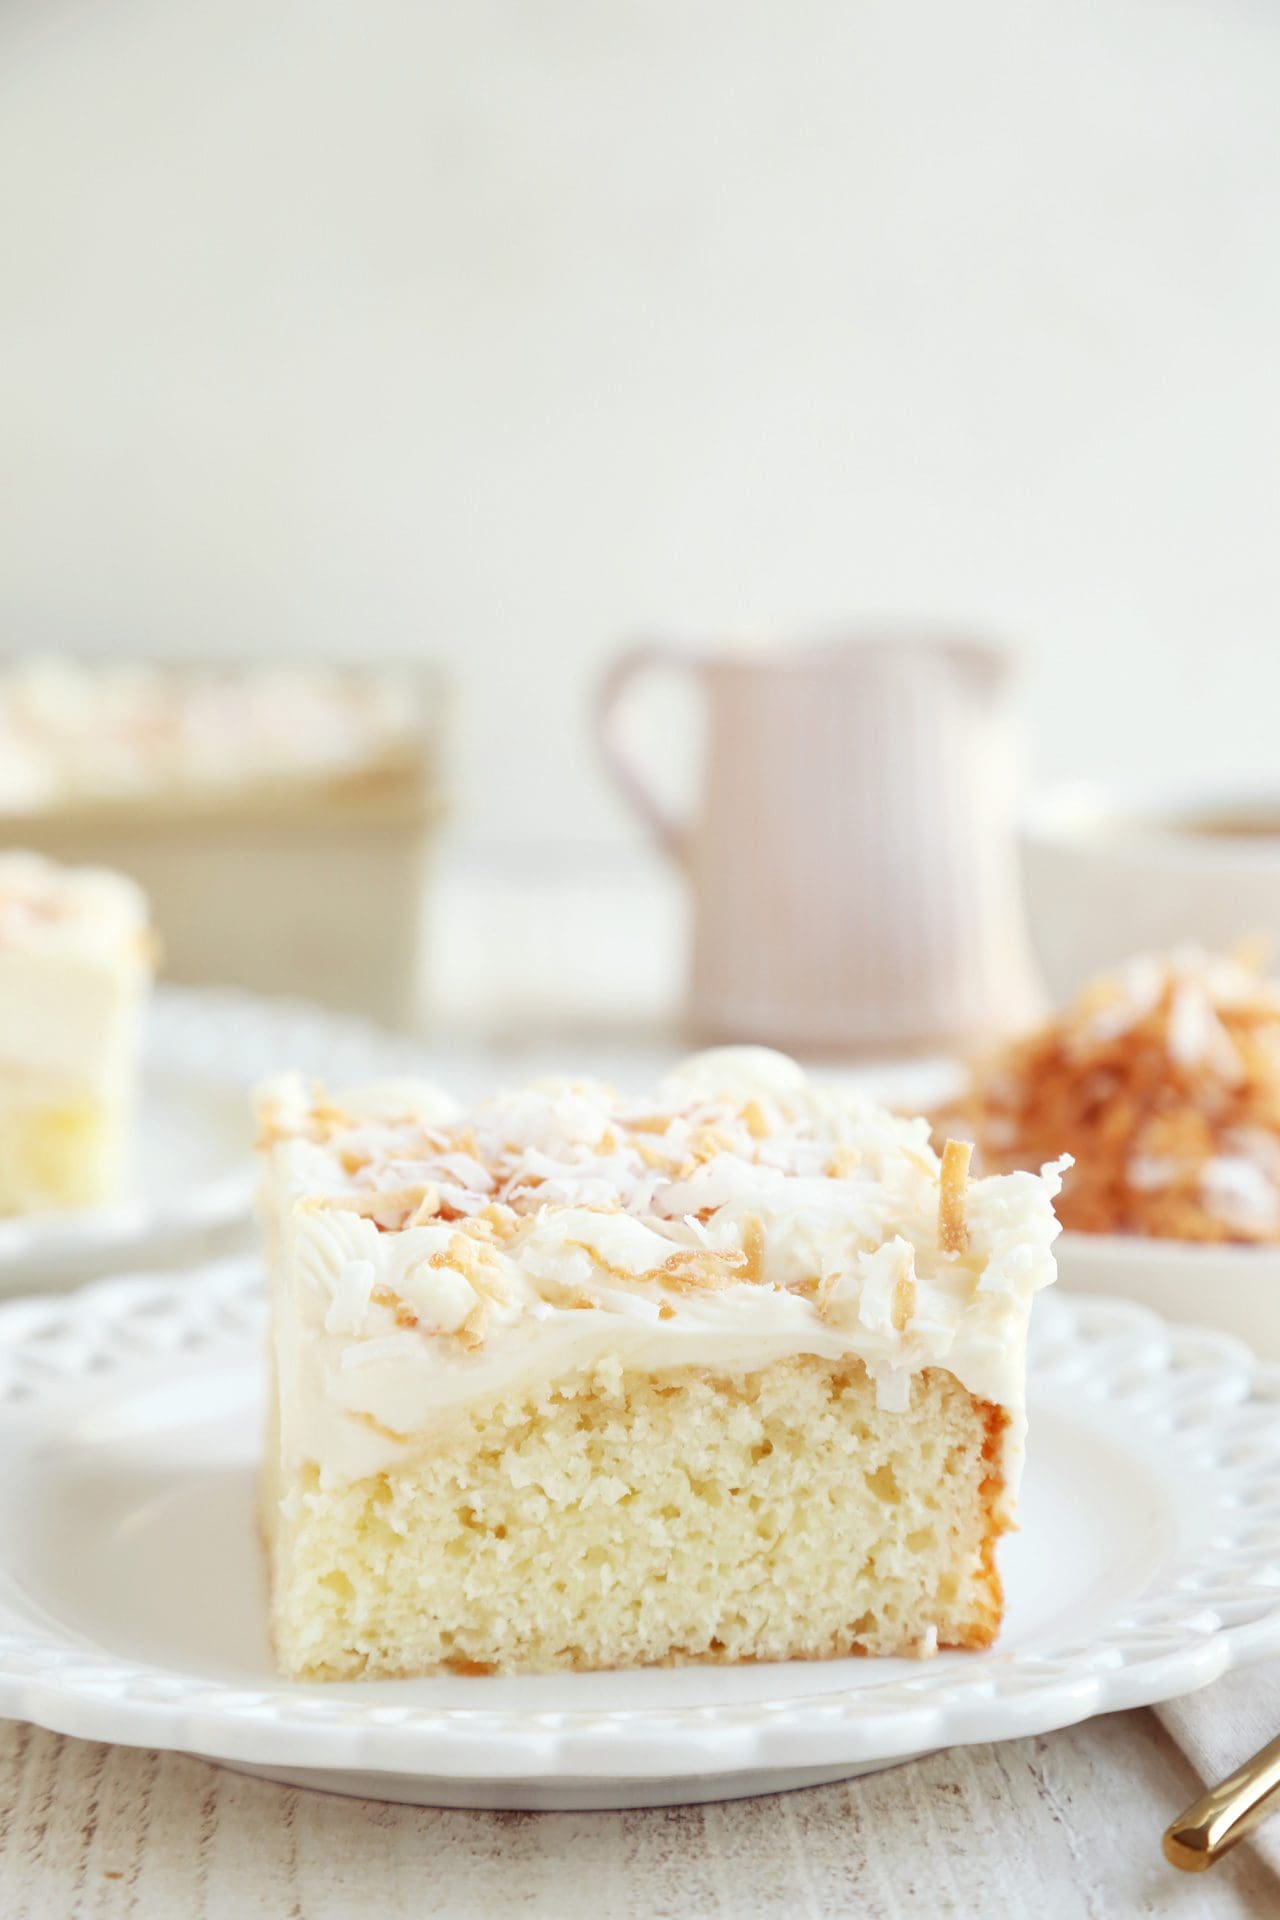 https://joythebaker.com/2022/05/my-favorite-coconut-cake-is-actually-made-with-cake-mix/attachment/0s9a2927/